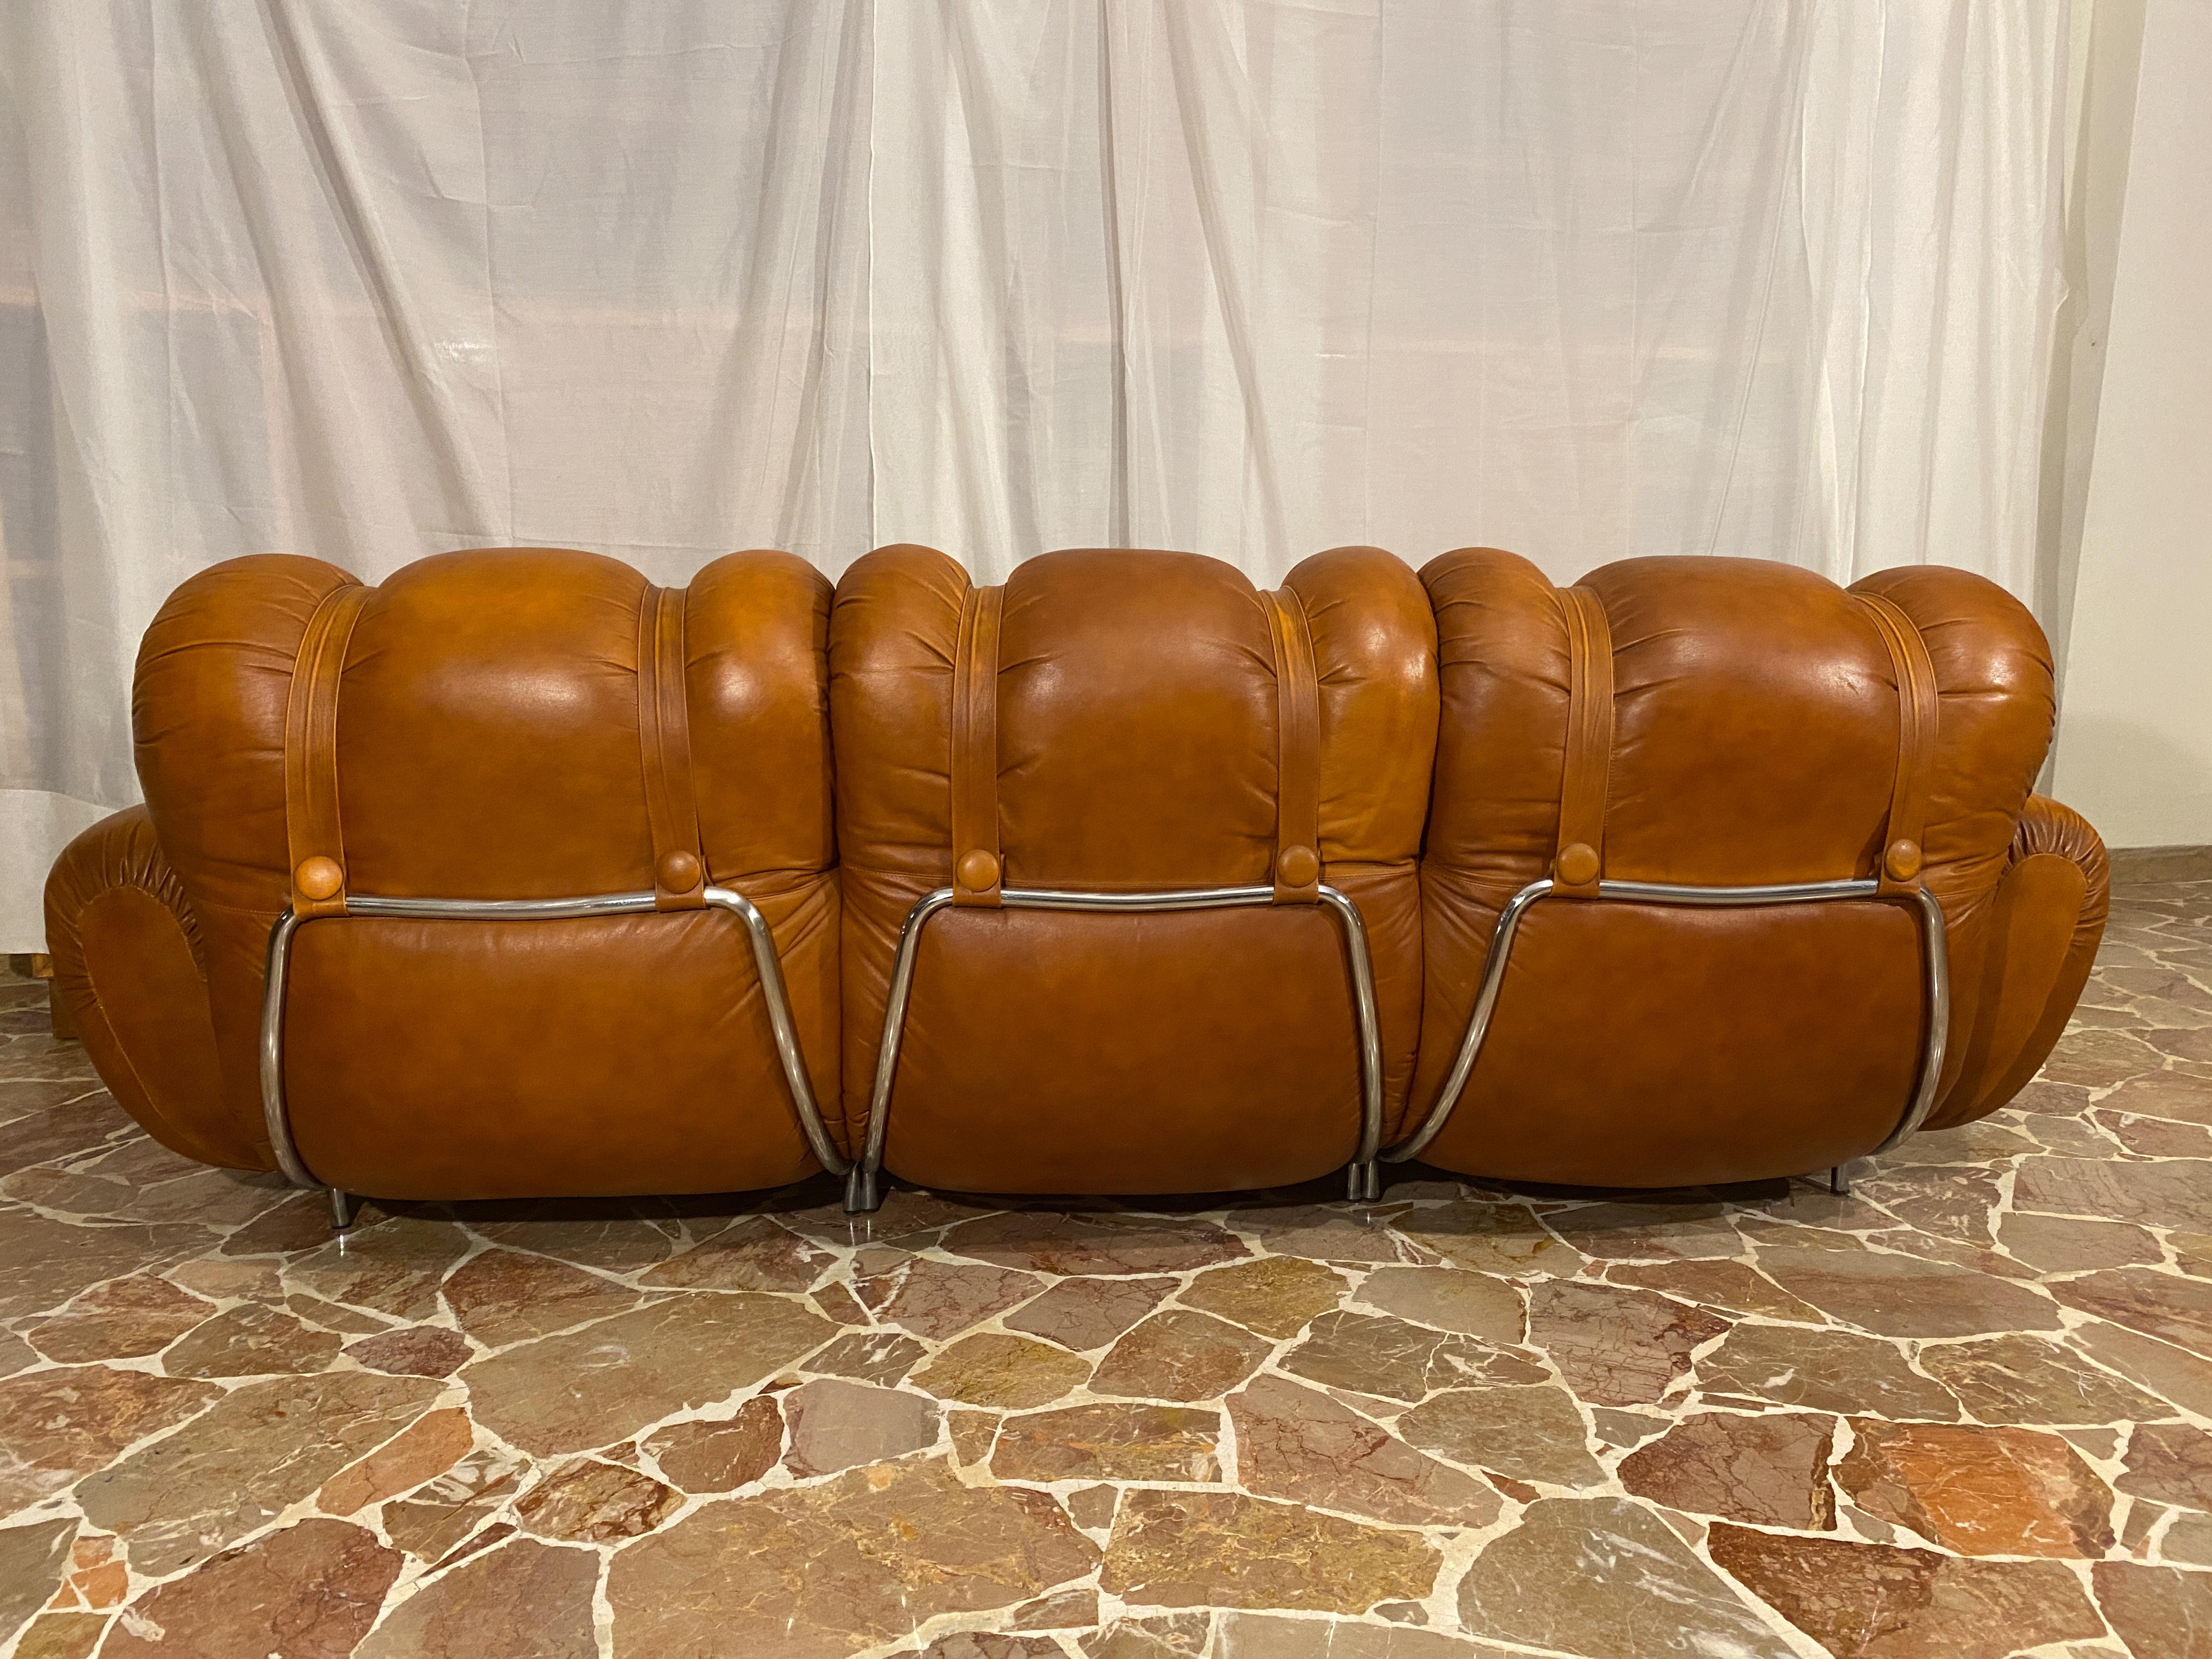 Italian Midcentury Three-Seater Natural Leather Space Age Sofa, 1970s For Sale 1